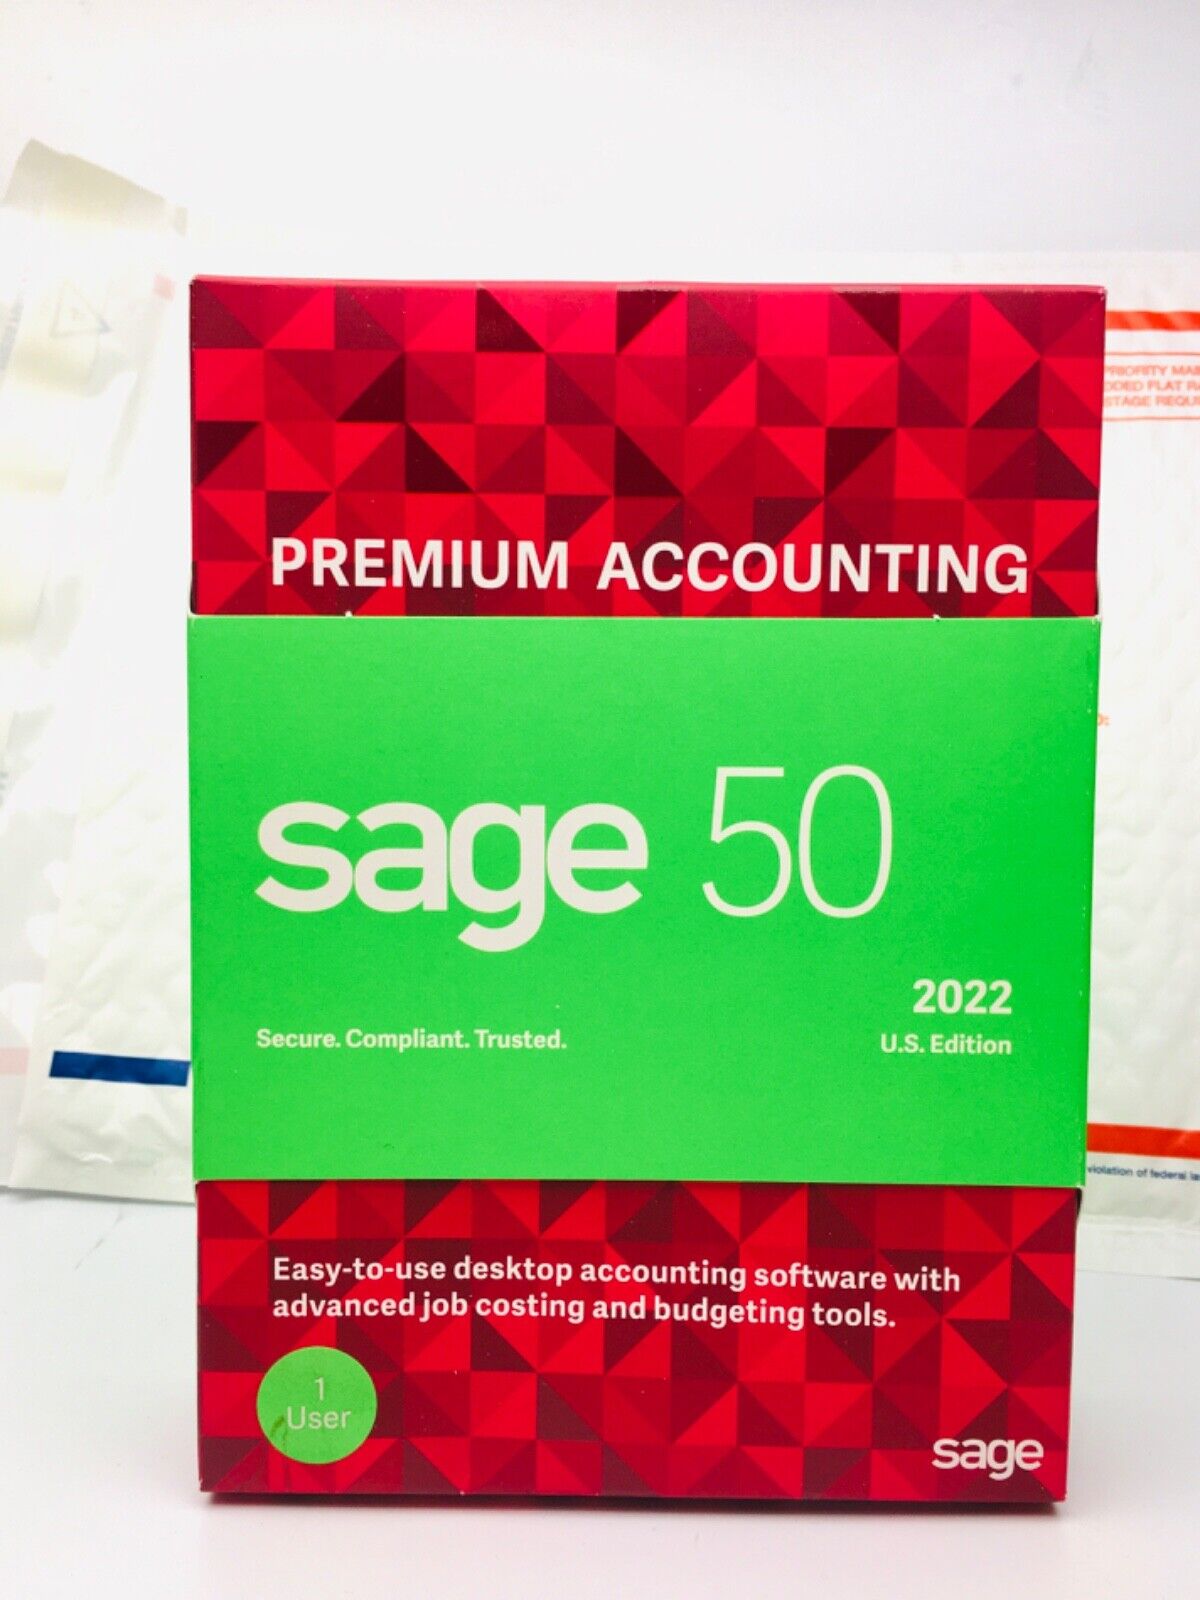 NEW Sage 50 Premium Accounting 2022 US Edition 1-User  for Windows Sealed 